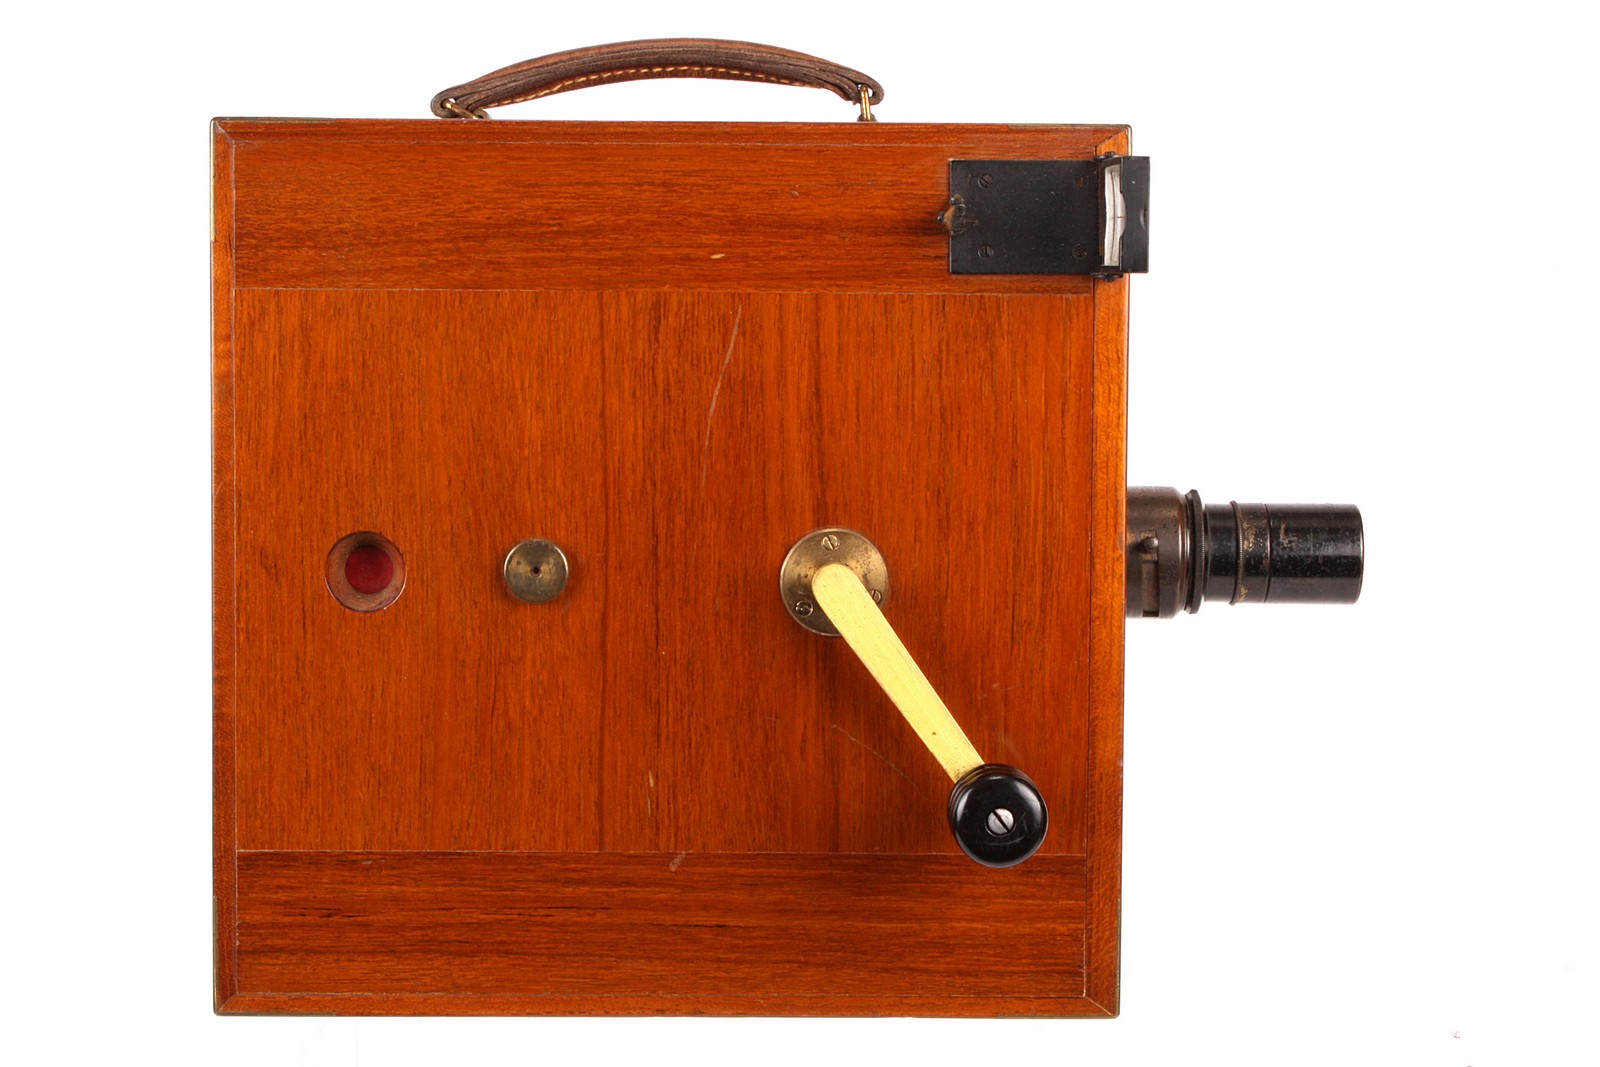 An Ensign Cinematograph Tropical 35mm Hand-Crank Camera, serial no. 343, c1914, polished brass bound - Image 3 of 5